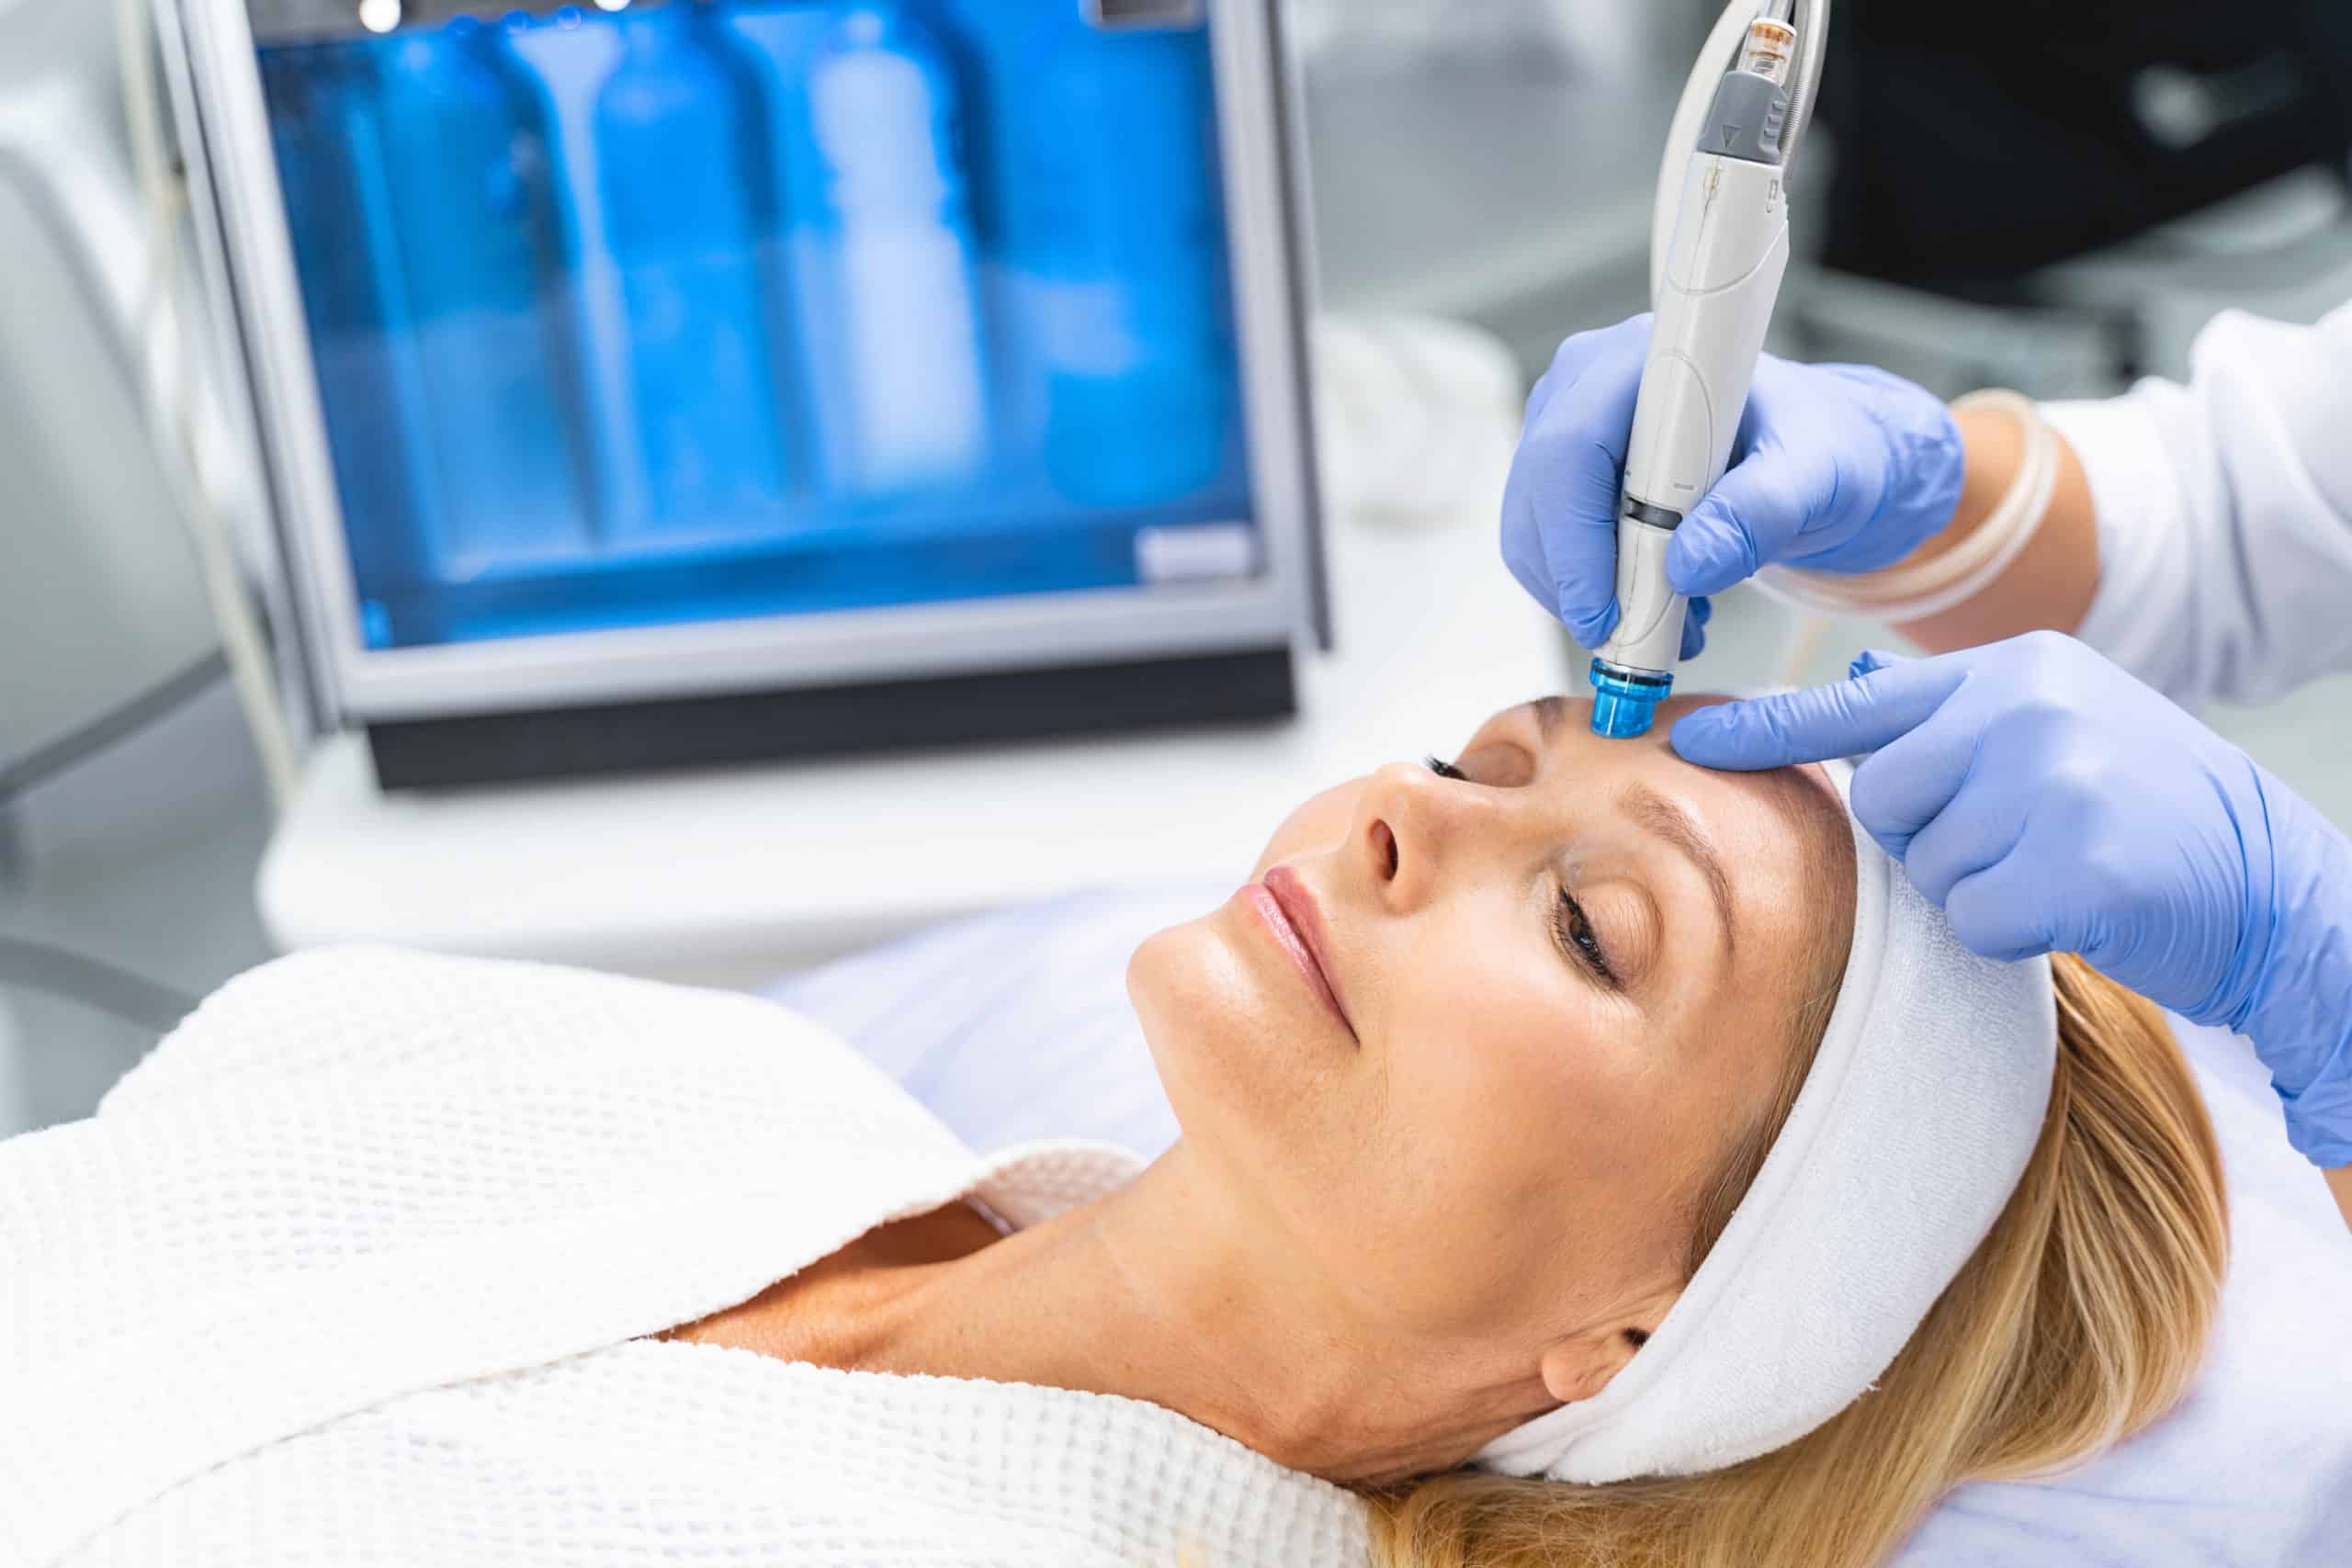 Hydrodermabrasion & HydraFacial Is This Trend Worth It